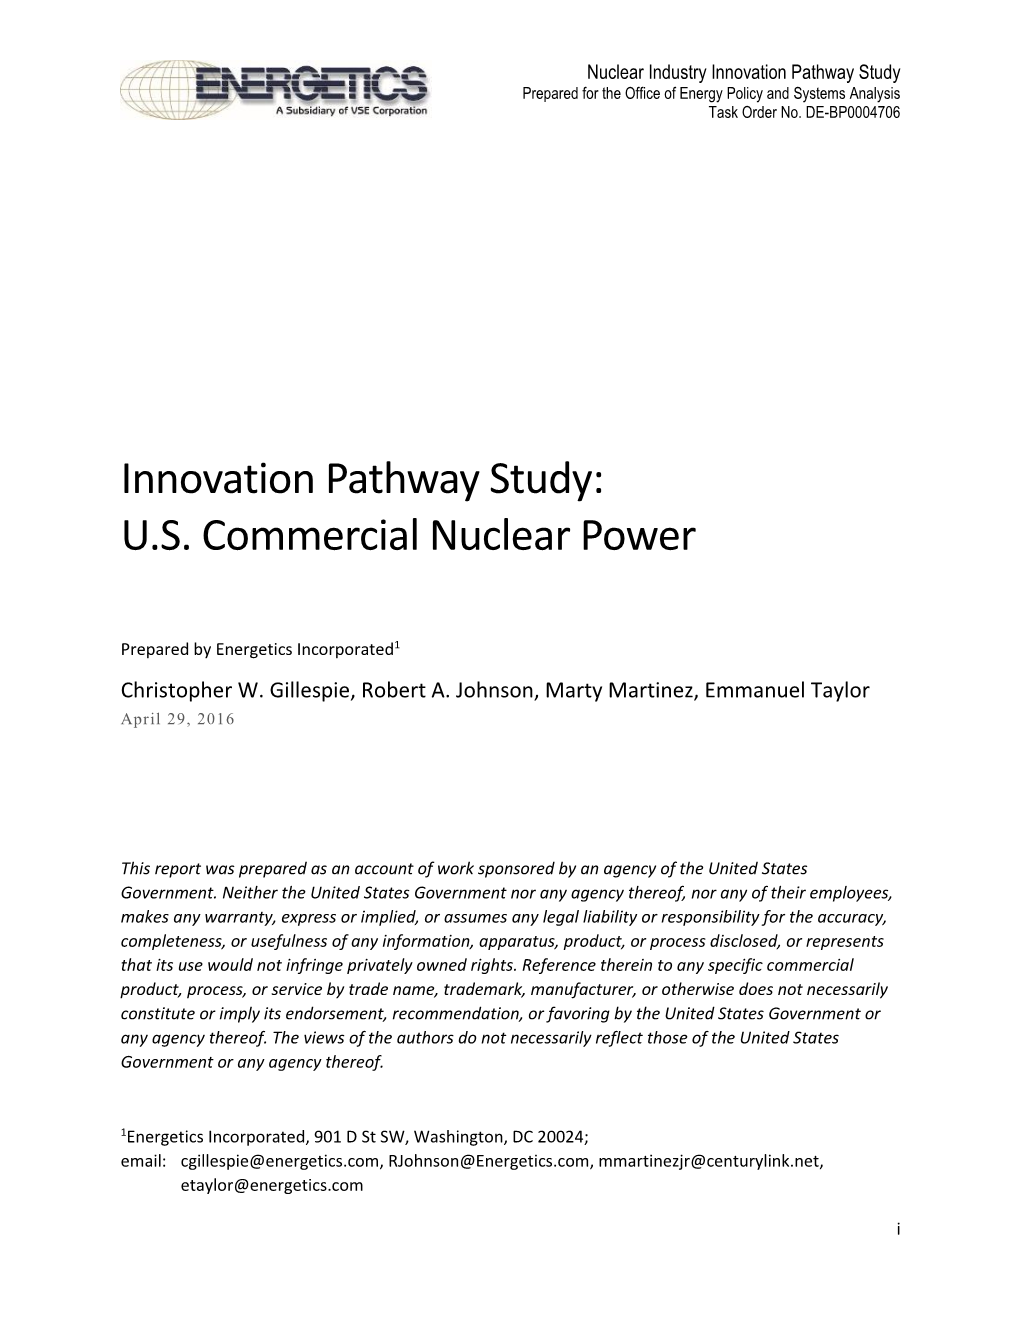 Innovation Pathway Study: U.S. Commercial Nuclear Power